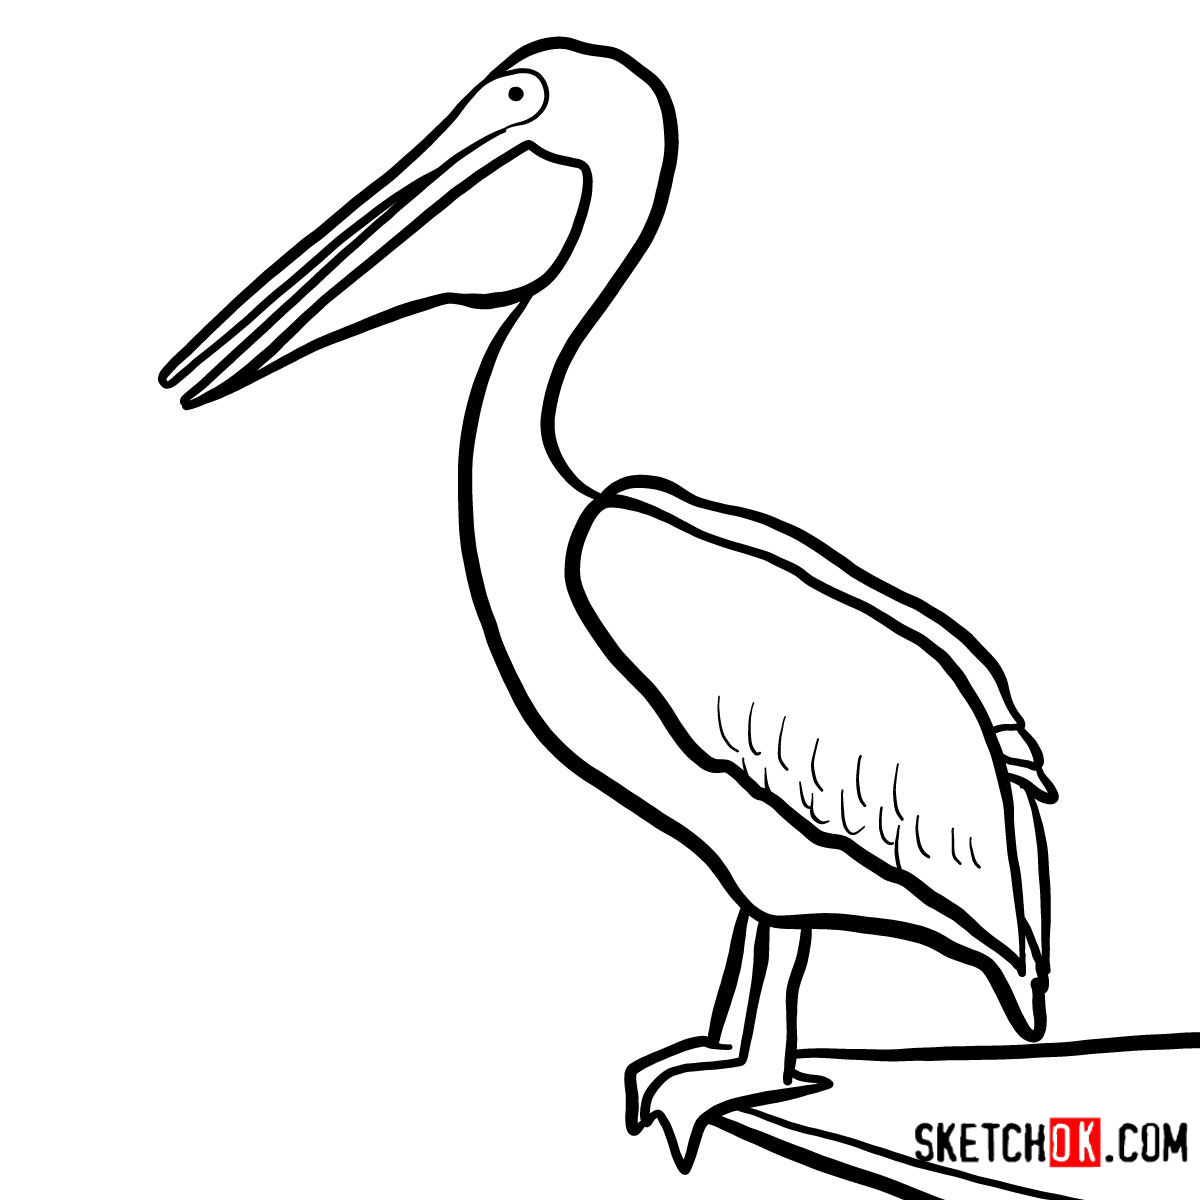 How to draw a Pelican